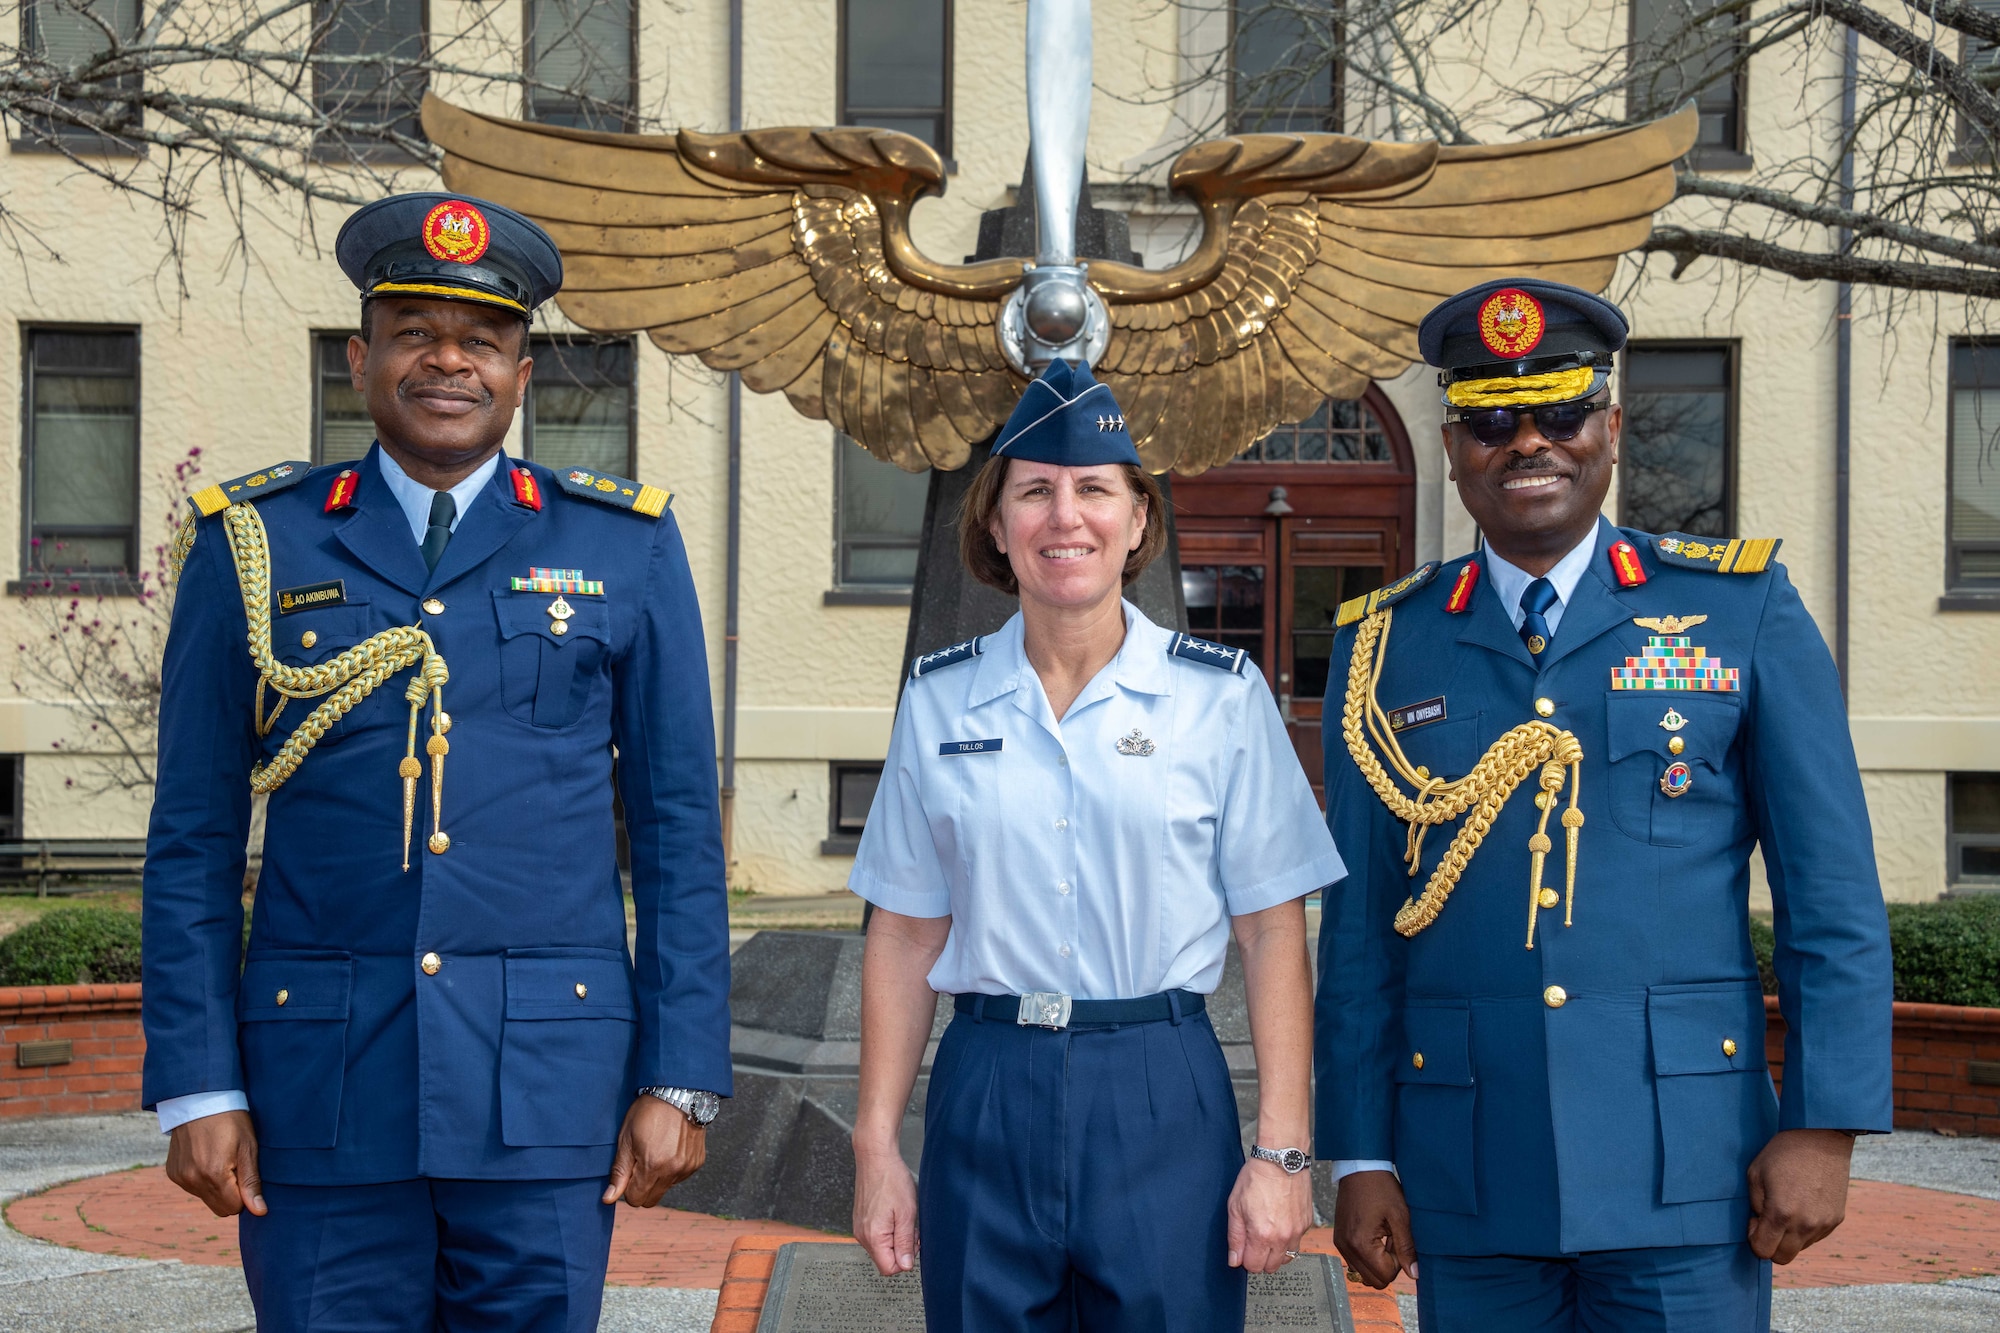 Air University Commander and President Lt. Gen. Andrea Tullos welcomes Nigerian Air Force Air Commodore Ayodele Oludamilola Akinbuwa (left) and Air Vice Marshal Micheal Nnanye Onyebashi (right) to Maxwell Air Force Base, Montgomery, Ala., Feb. 8, 2023. Onyebashi and Akinbuwa came to AU as part of the Nigerian Air Force Air Warfare Centre reciprocal visit.